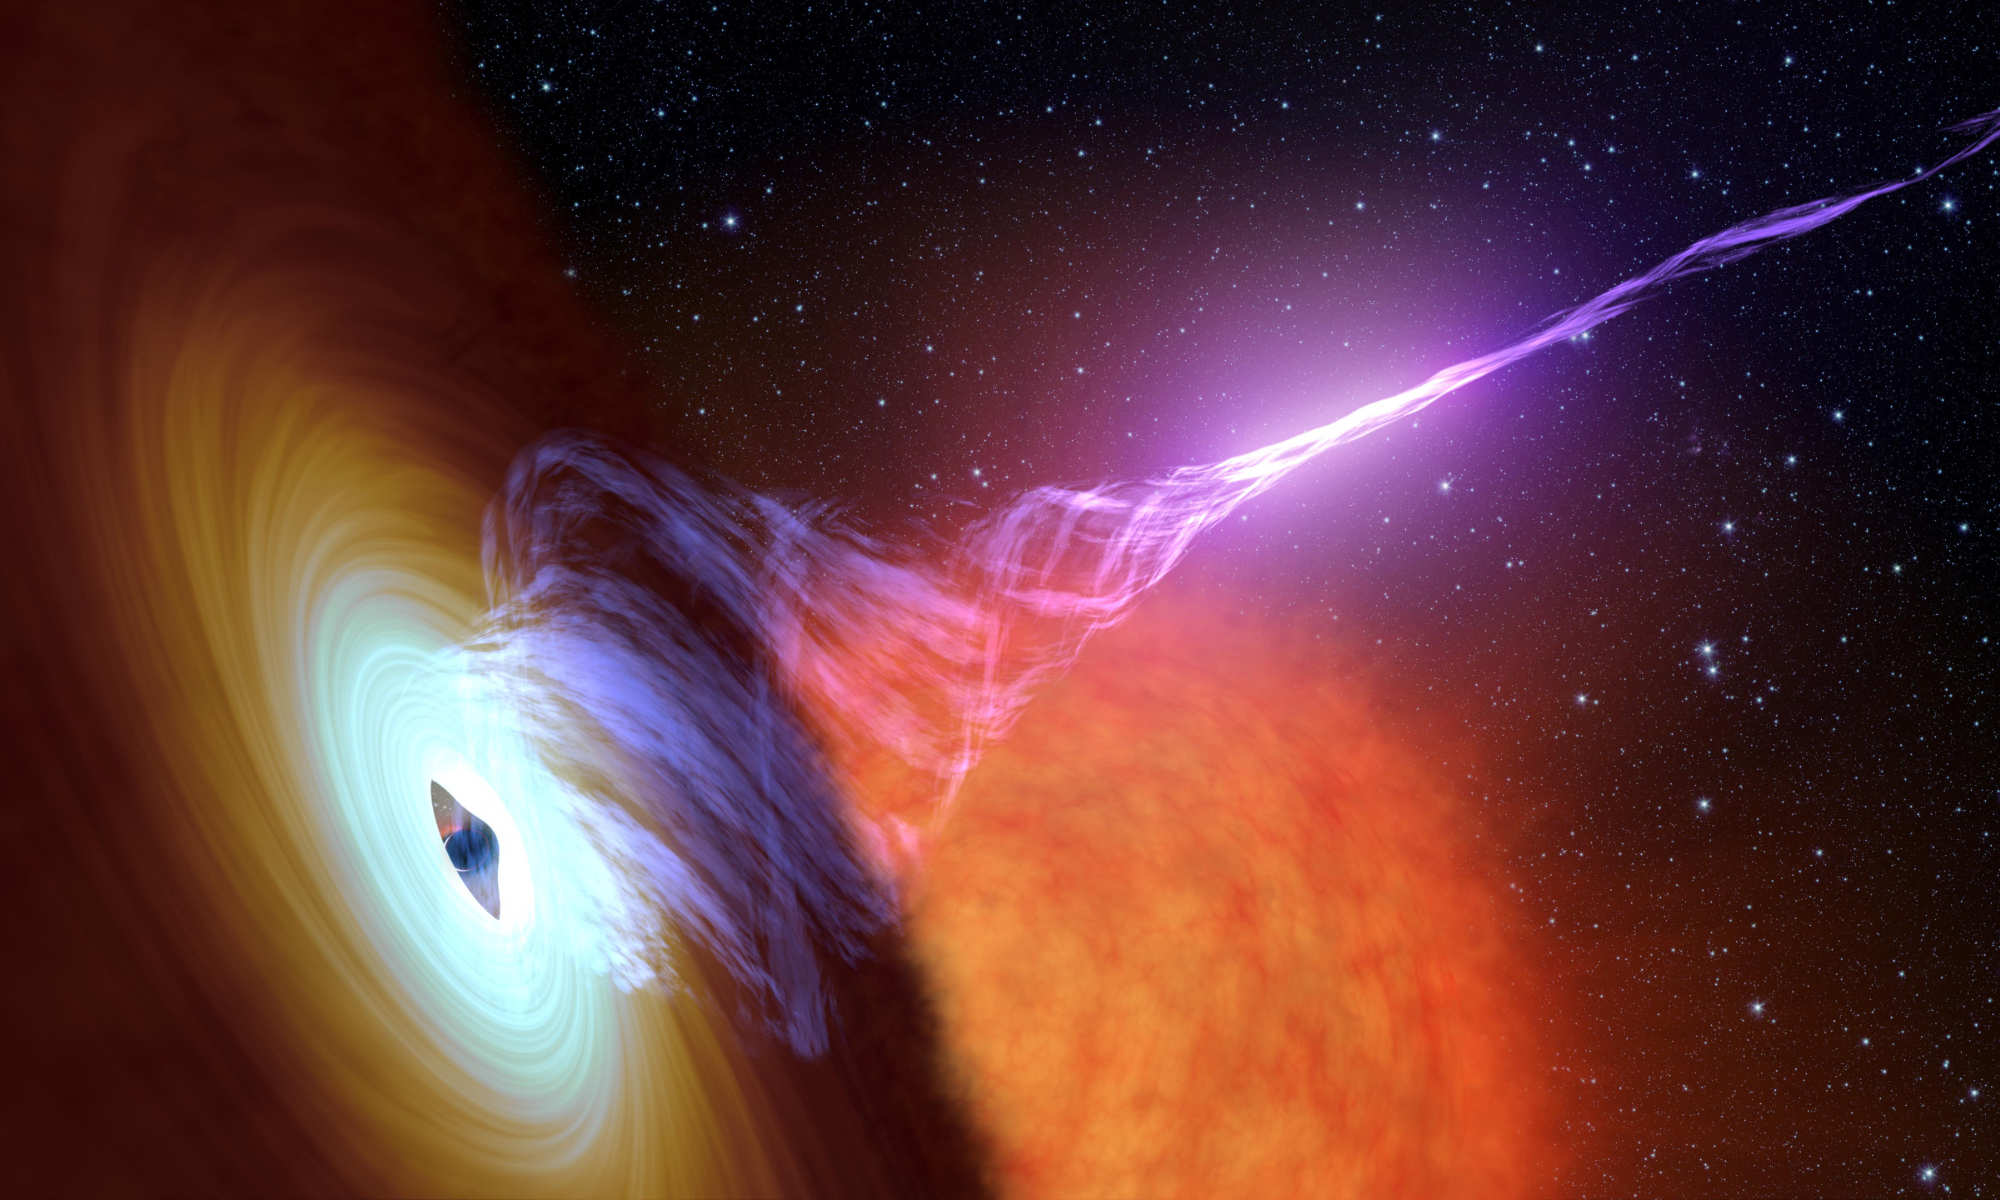 Illustration of a black hole with plasma jets spewing forth.